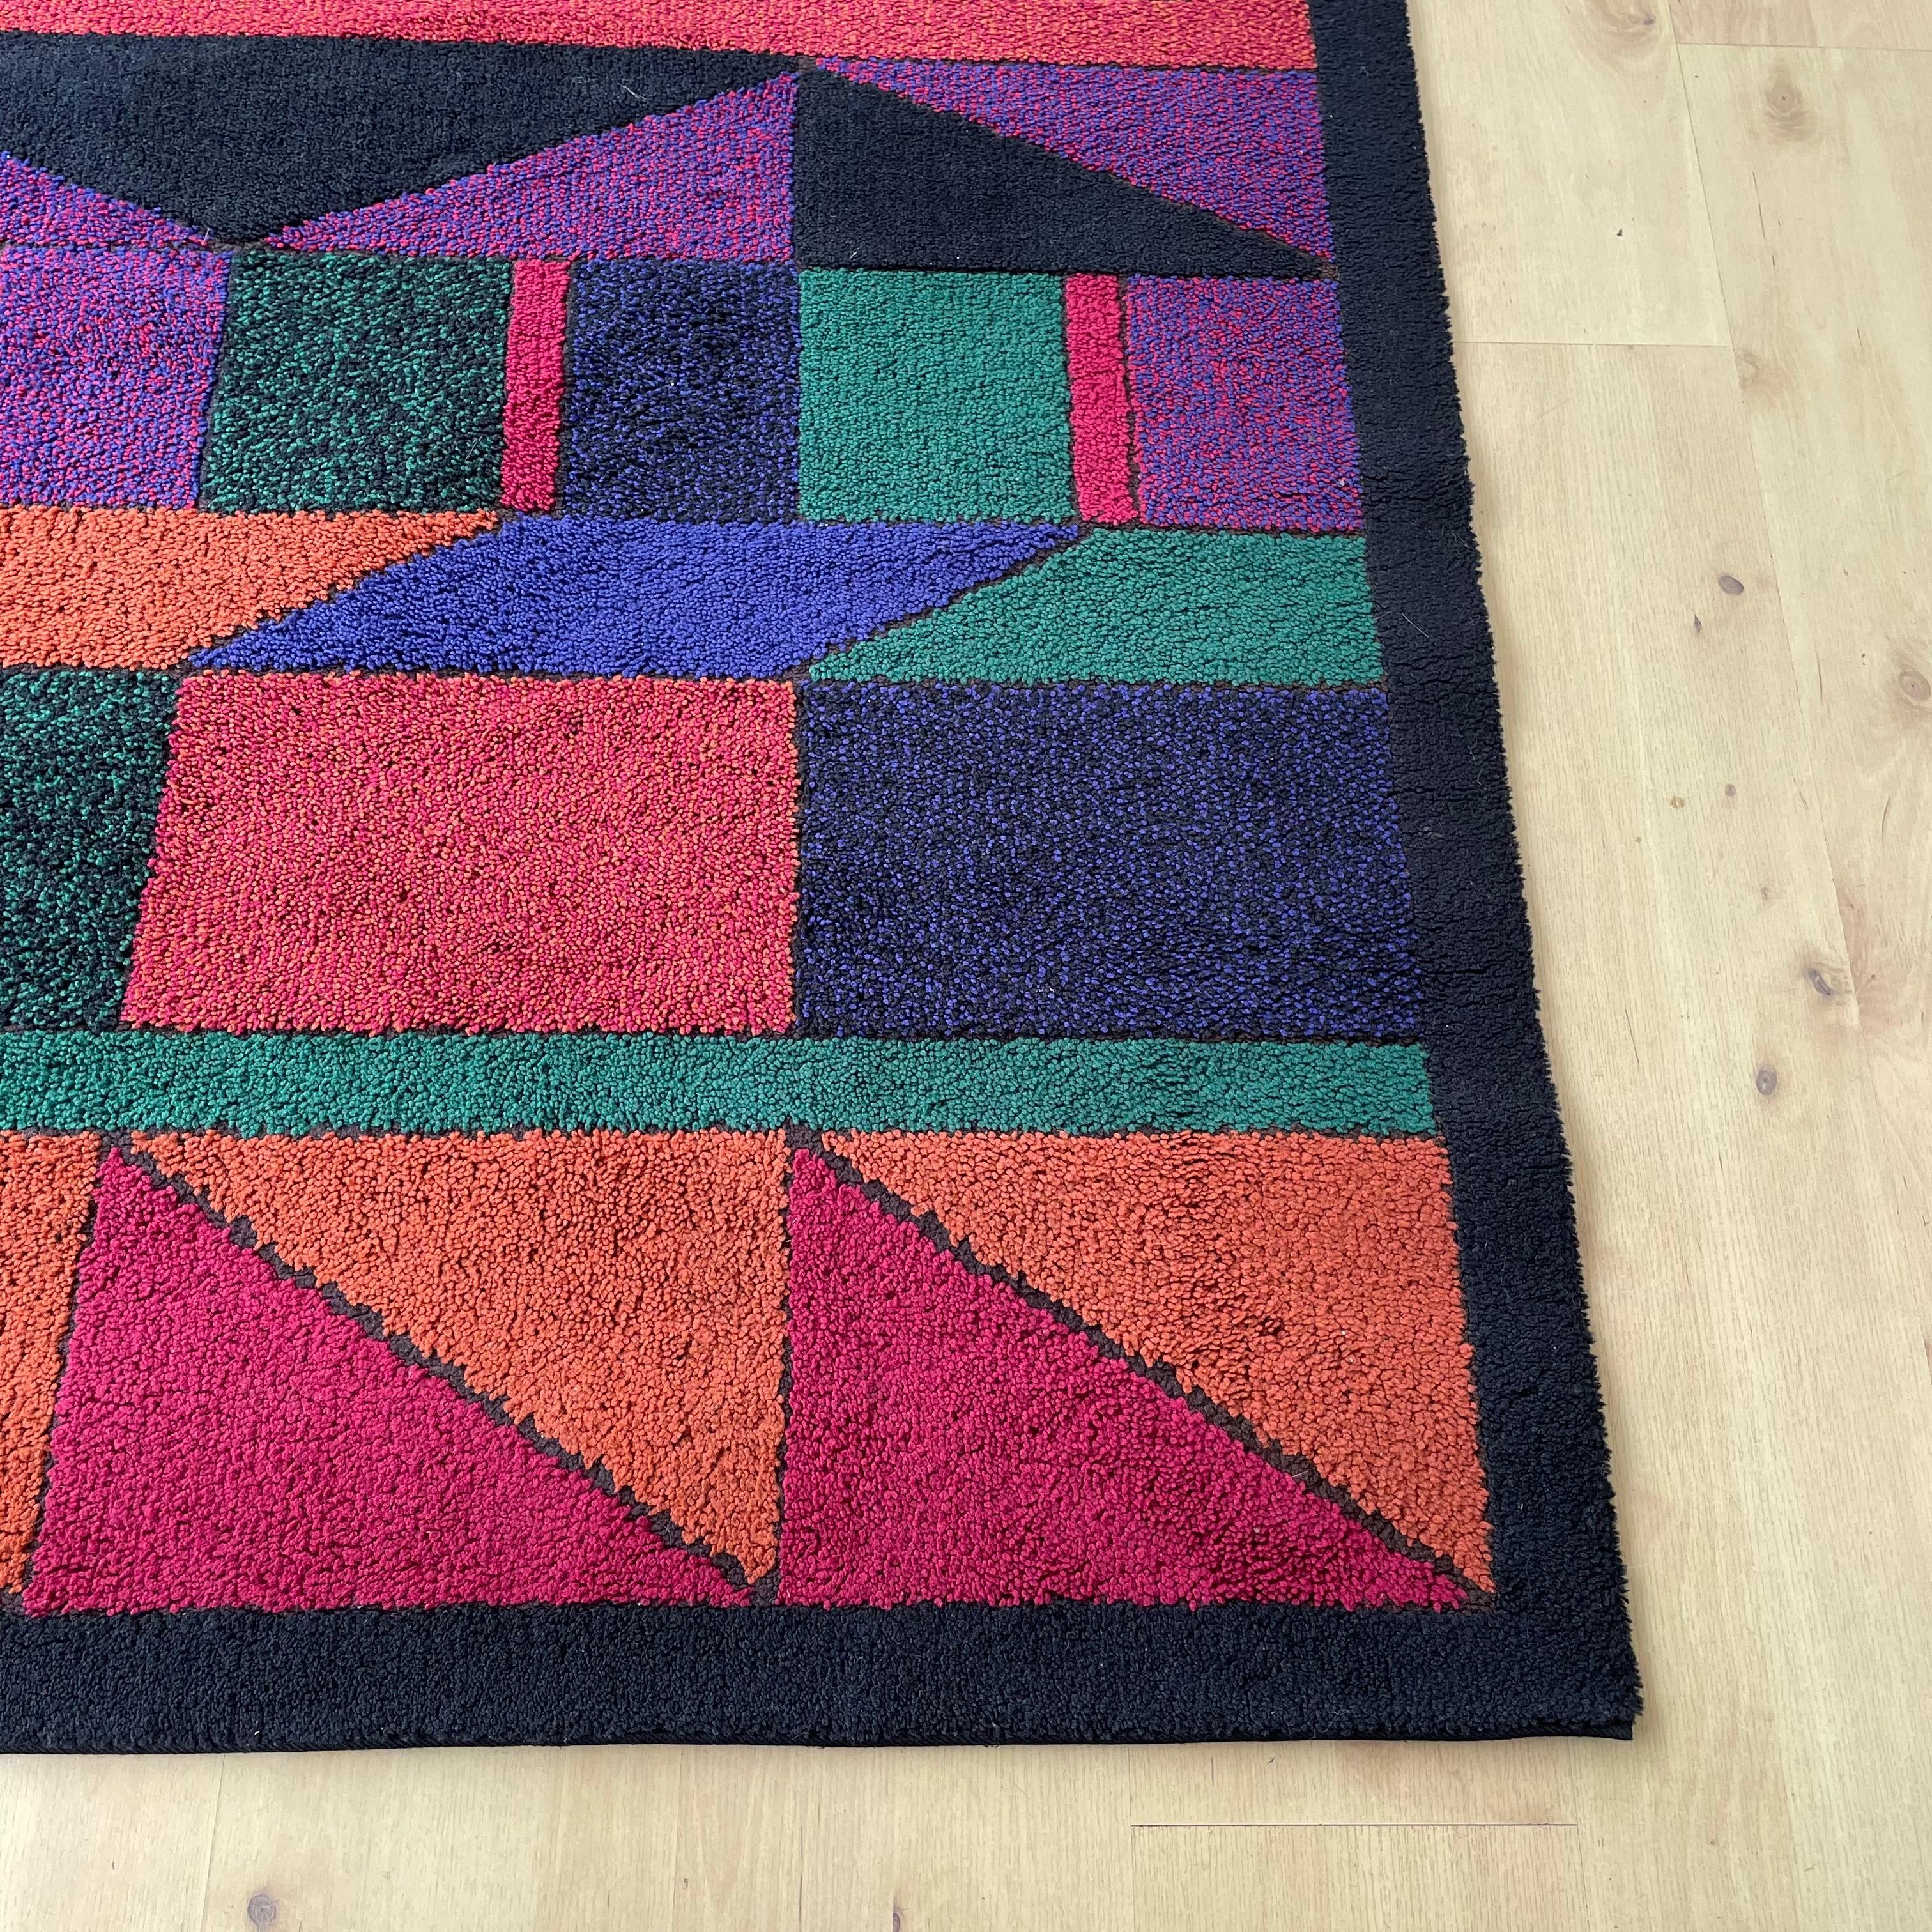 Wool Psychedelic Memphis Style abstract Rug Carpet by Atrium Tefzet, Germany 1980s For Sale